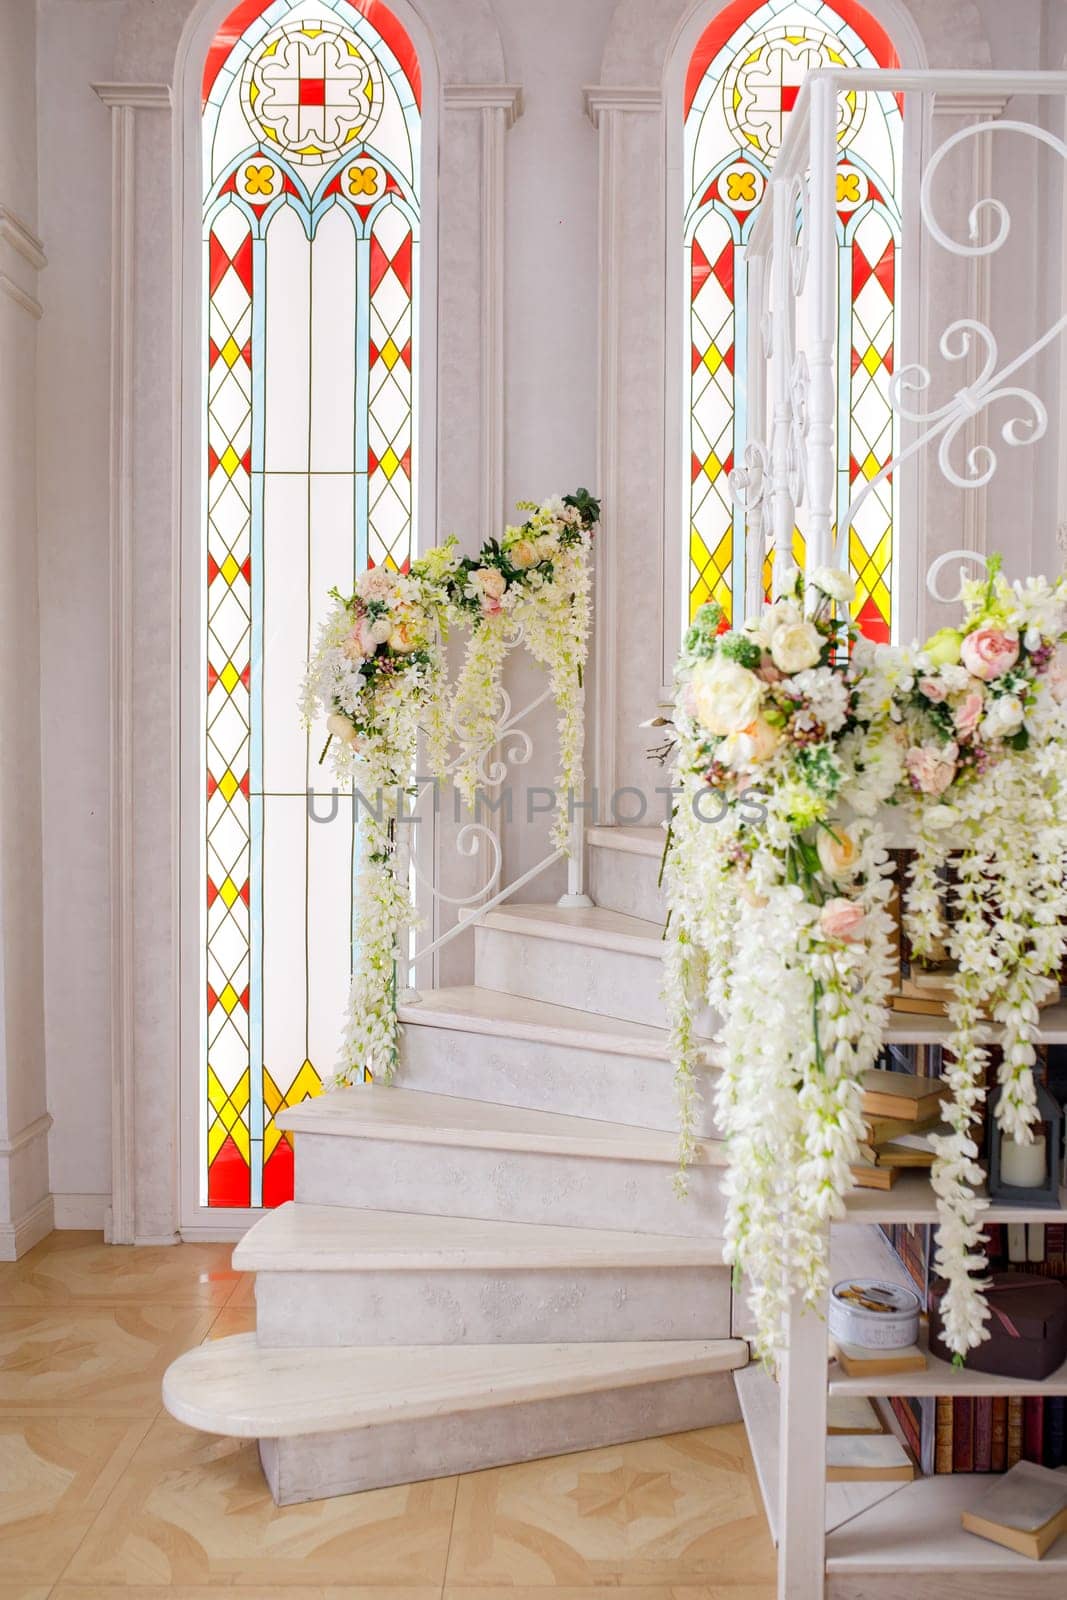 light steps with flowers and windows. High quality photo